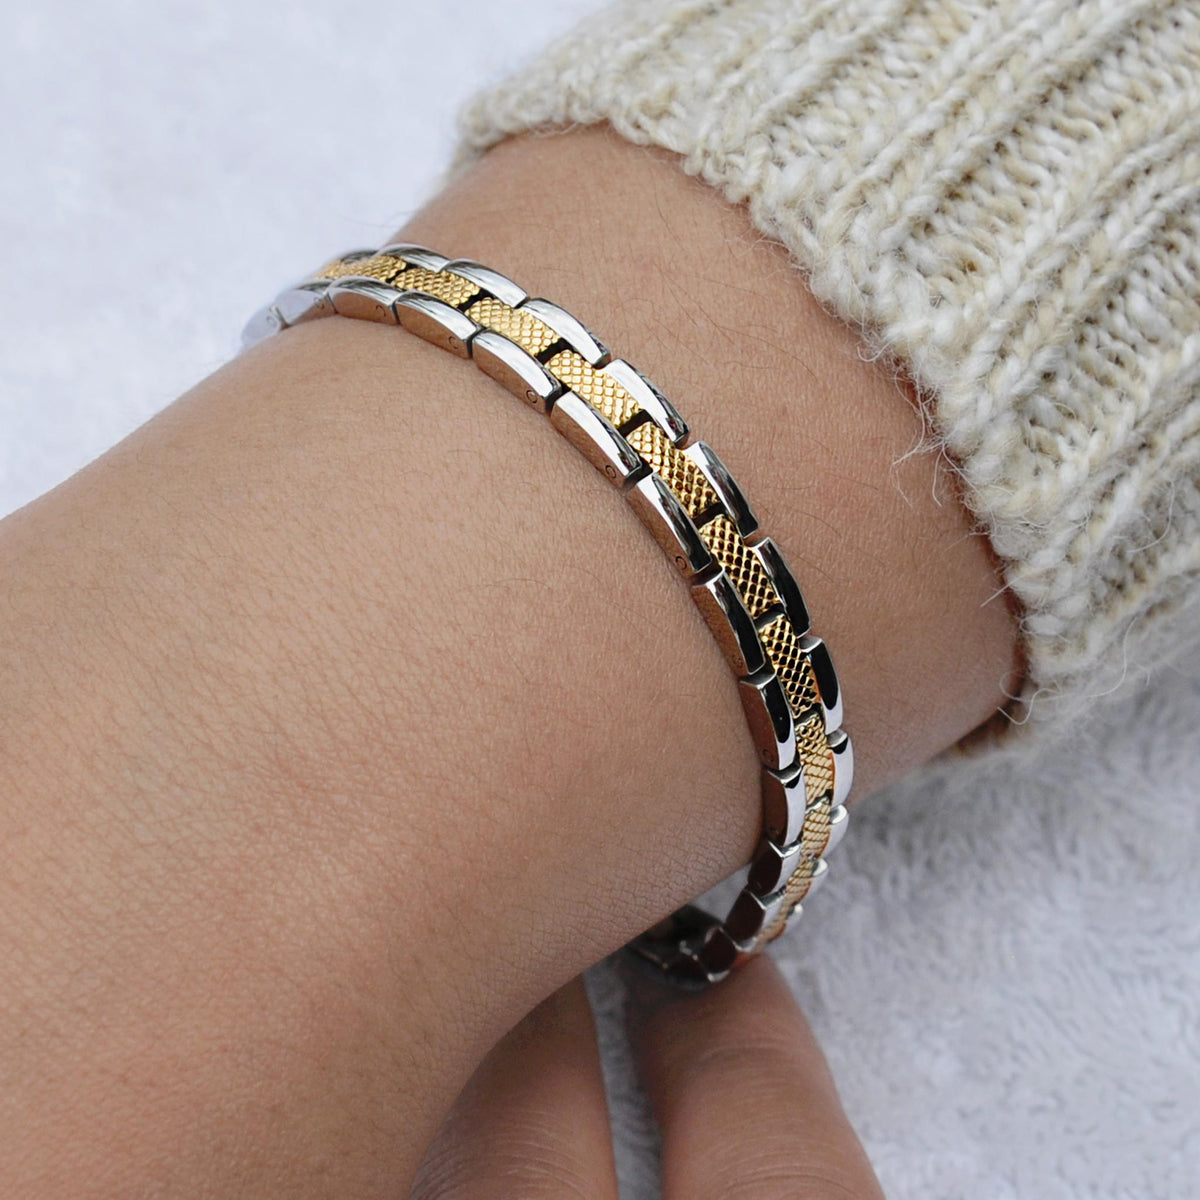 Magnetic bracelet with gold and silver details for ladies | DEMI+CO -  DEMI+CO Jewellery